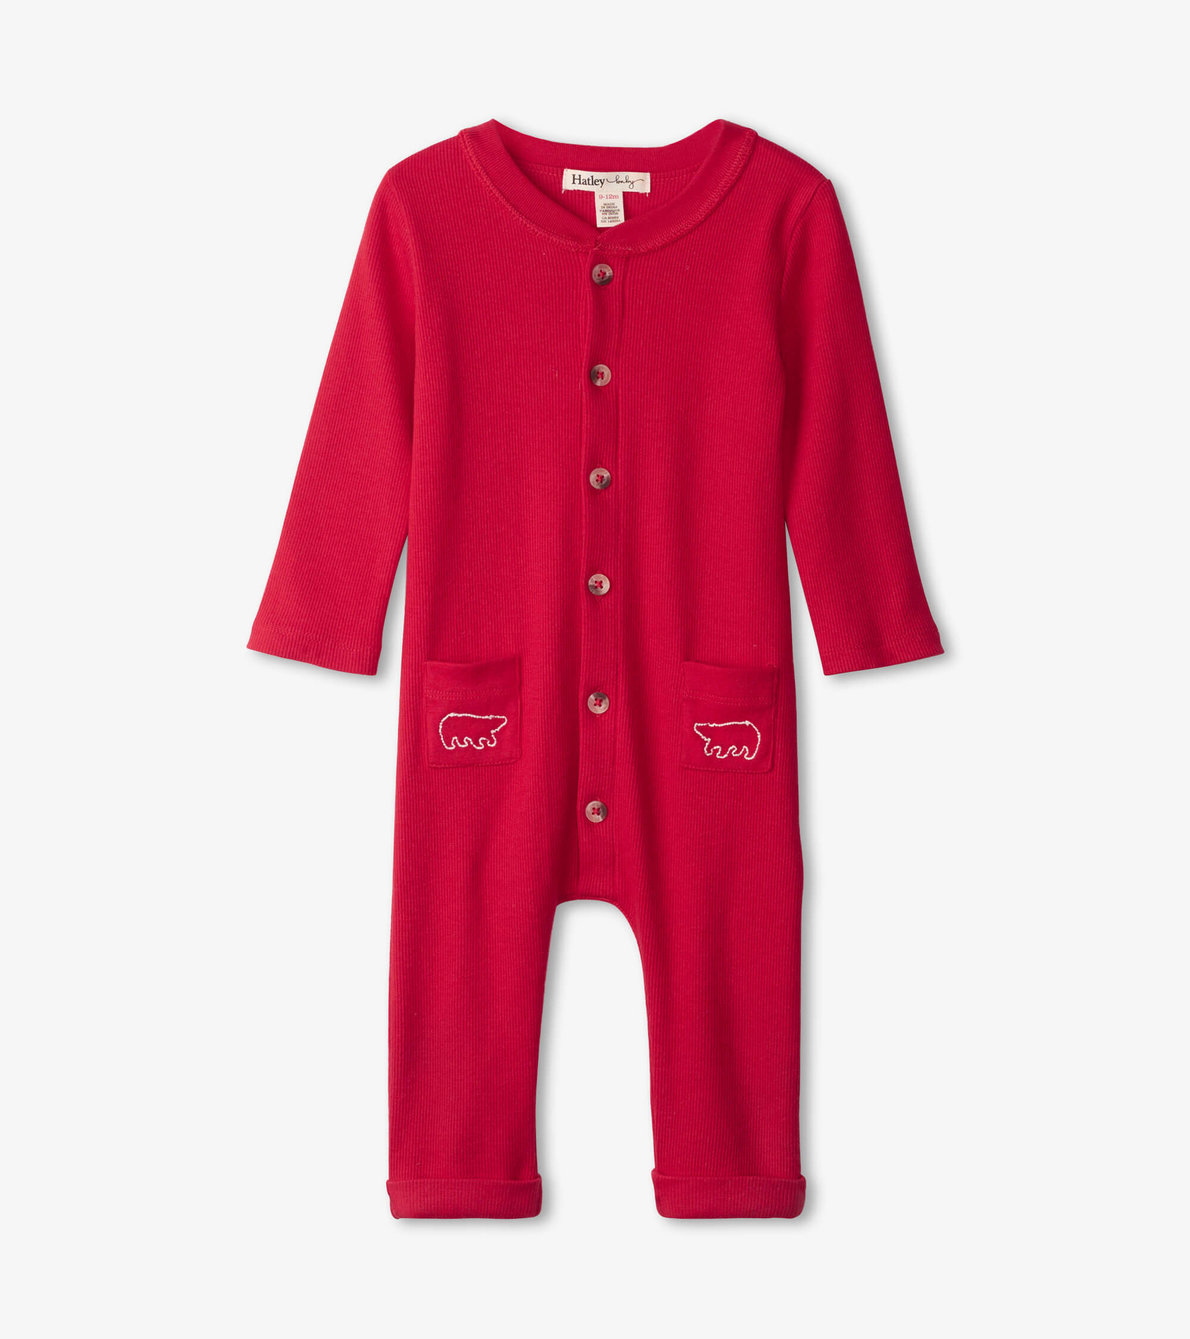 View larger image of Racing Red Plush Baby Henley Romper